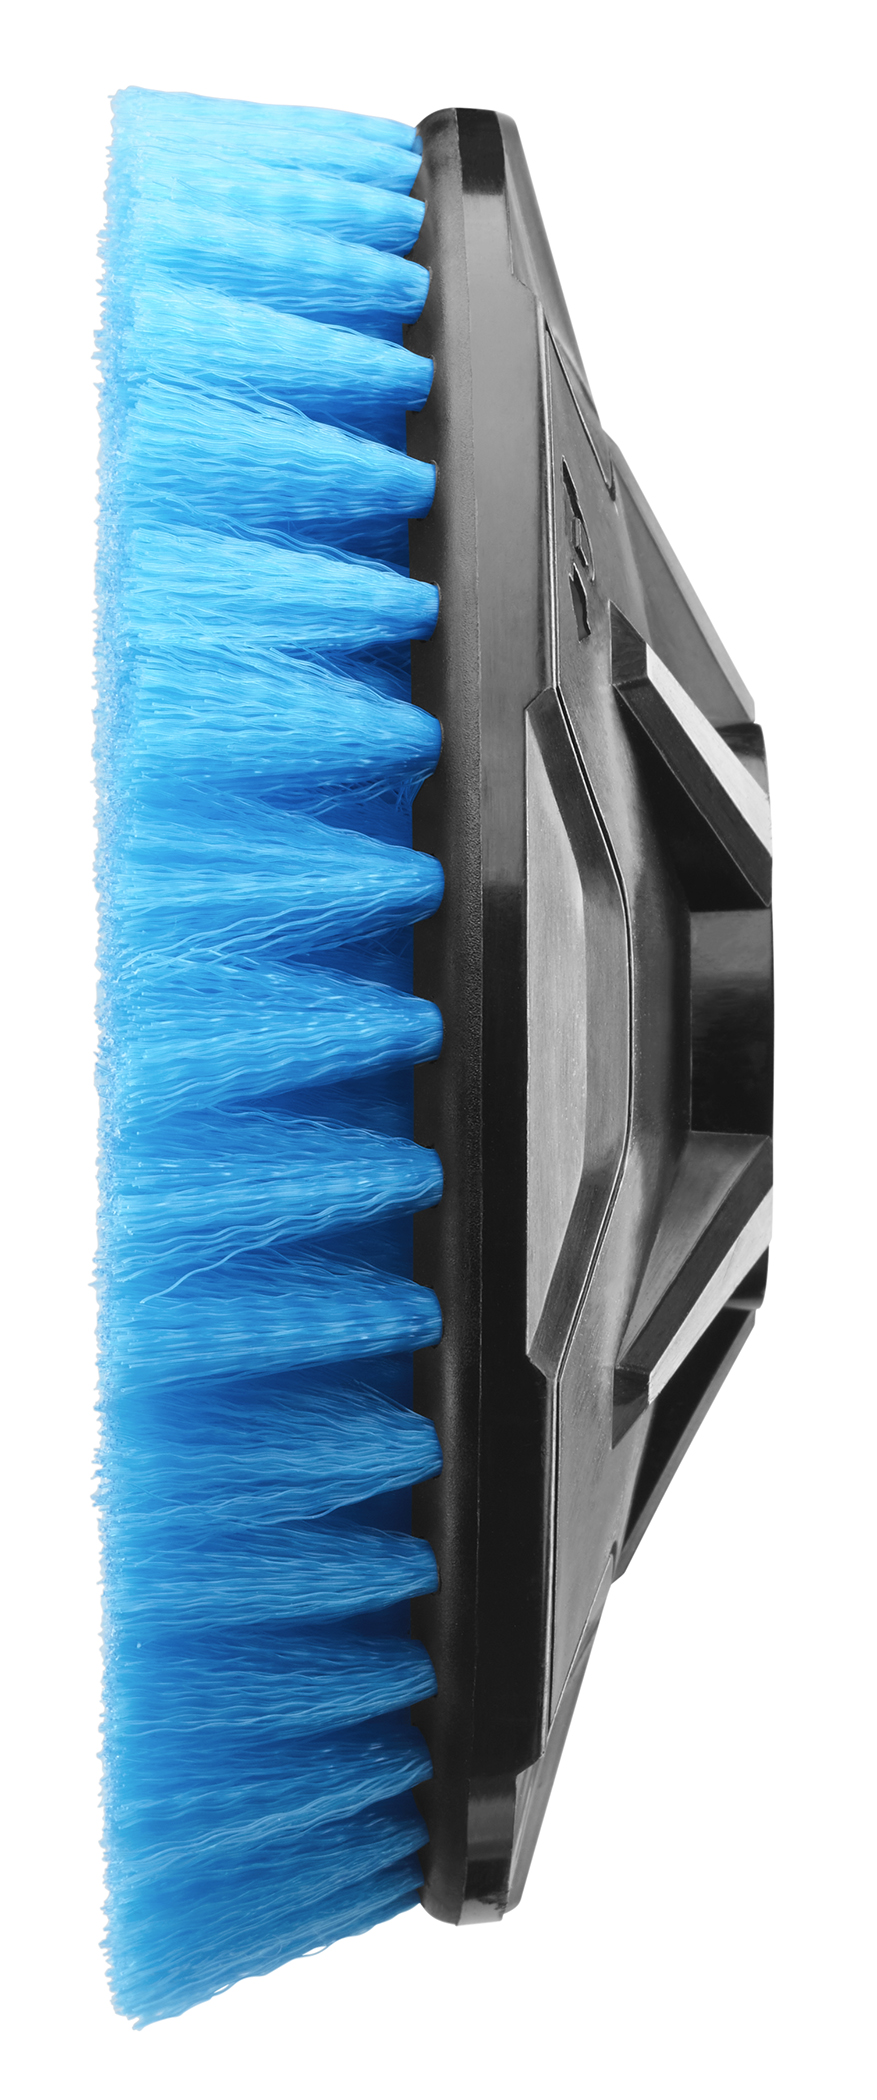 Hard Bristle And Super Soft Bristle Cleaning Brush In One, Laundry